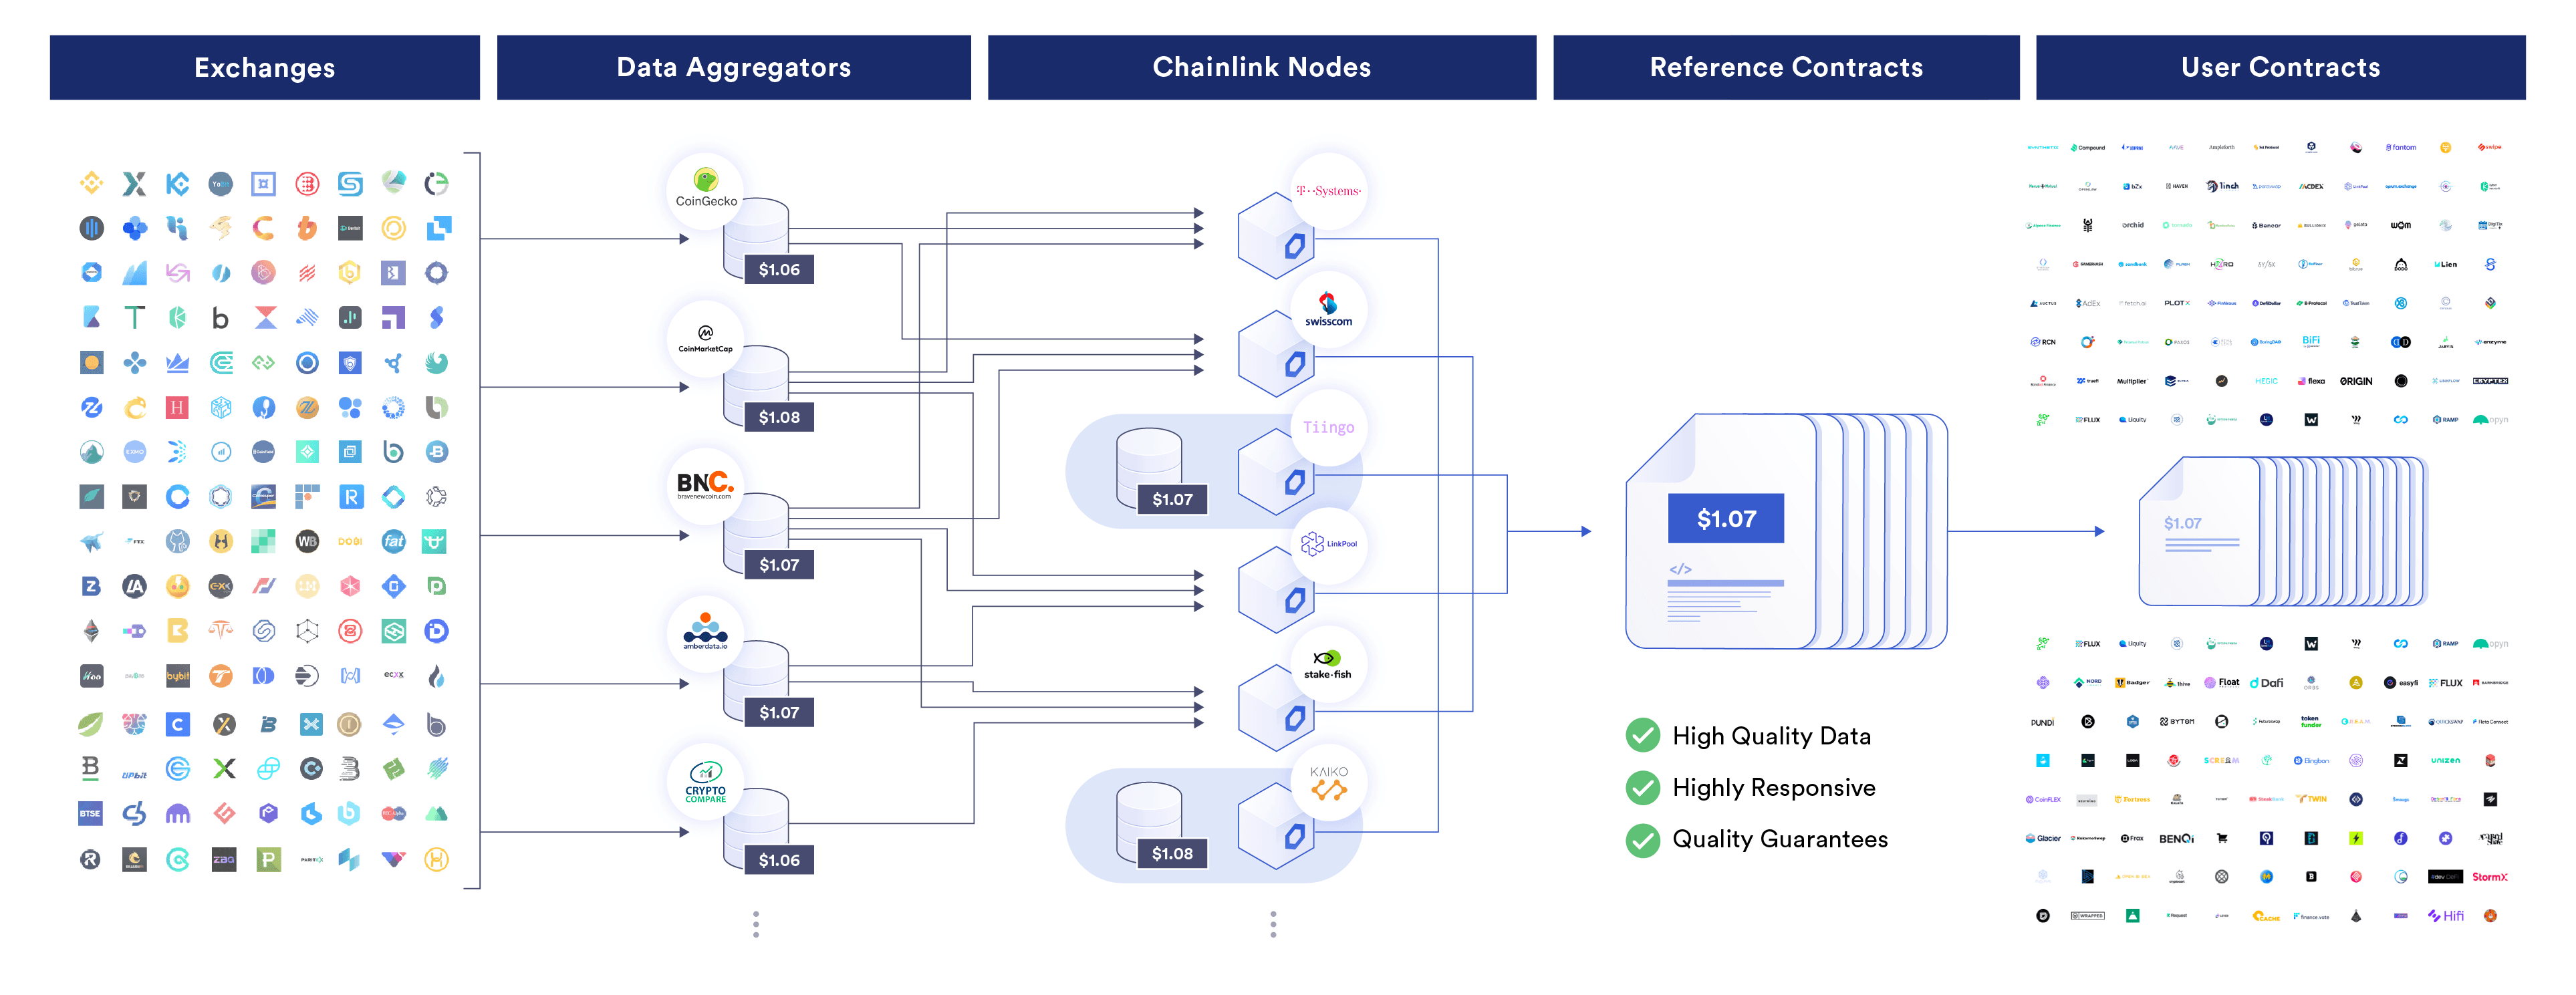 Chainlink Price Feed Aggregation